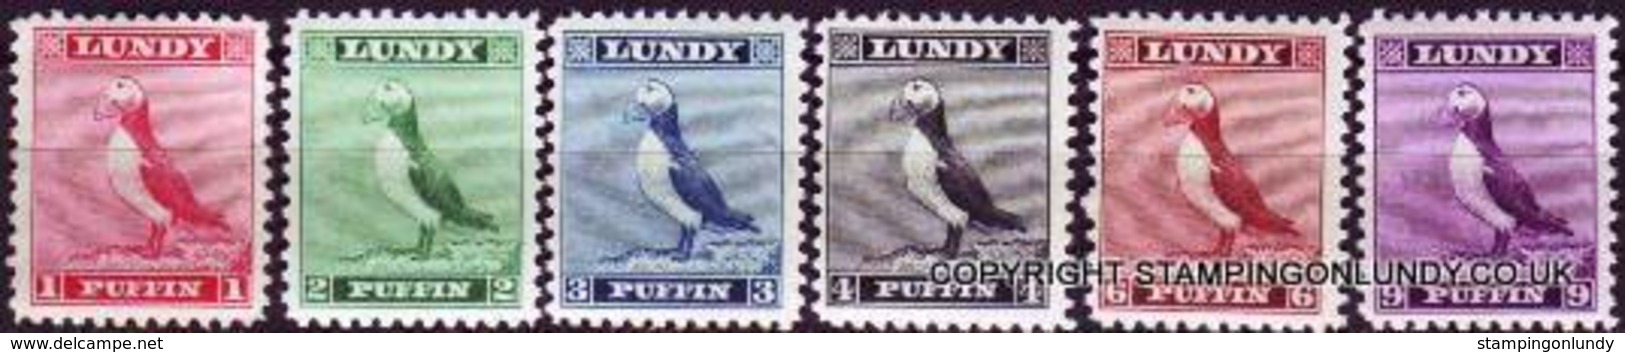 #L44. Great Britain Lundy Island Puffin Stamp 1957 Puffins Set Mint. Free UK P+p! Offers? - Local Issues